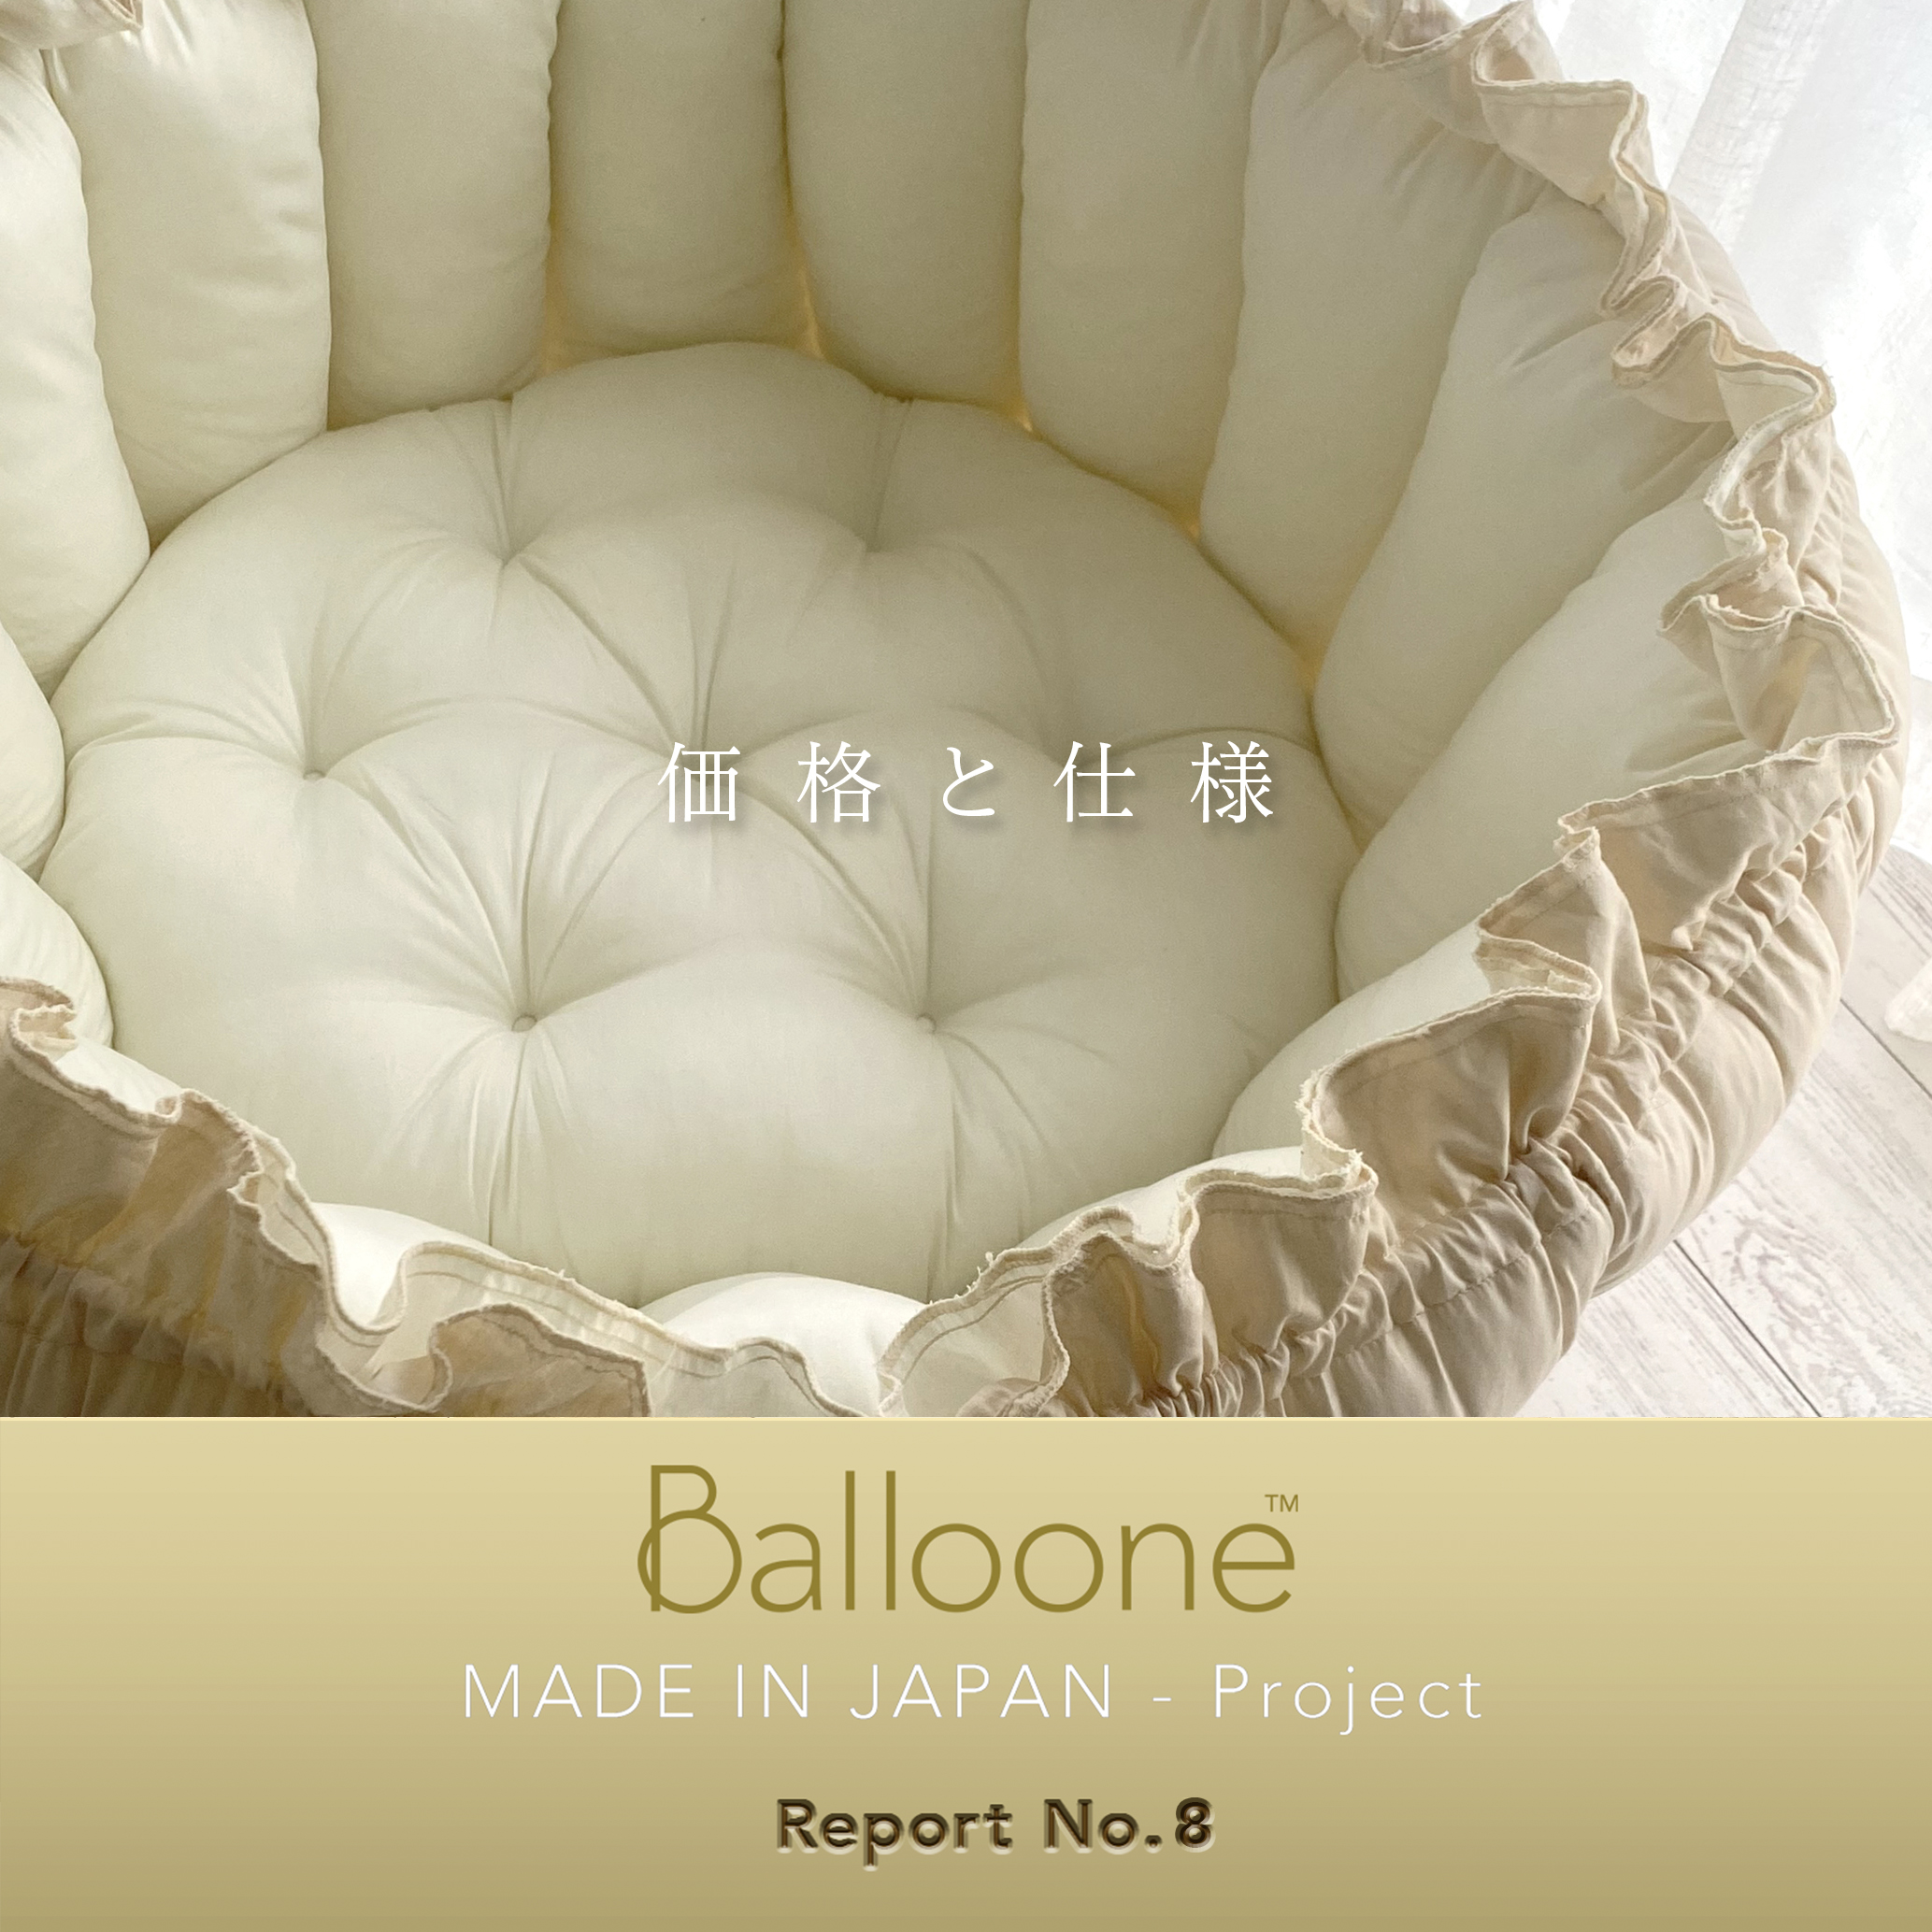 【Balloone／Made in Japan プロジェクト】リポート No.8